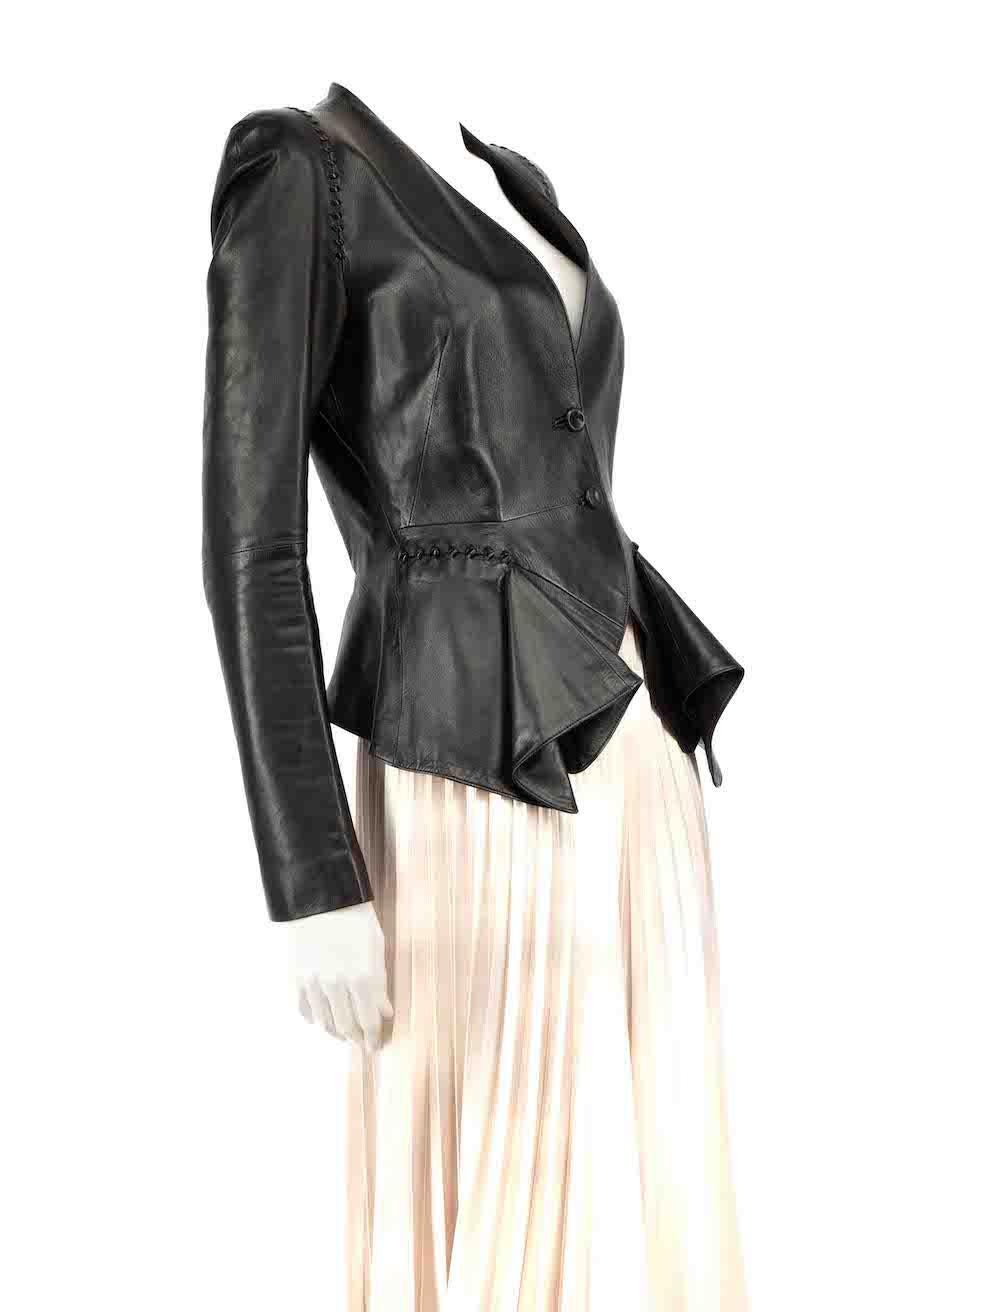 CONDITION is Very good. Hardly any visible wear to jacket is evident on this used Alexander McQueen designer resale item.
 
 
 
 Details
 
 
 Black
 
 Leather
 
 Jacket
 
 Whipstitch detail
 
 Flared hem
 
 Shoulder pads
 
 Button up fastening
 
 
